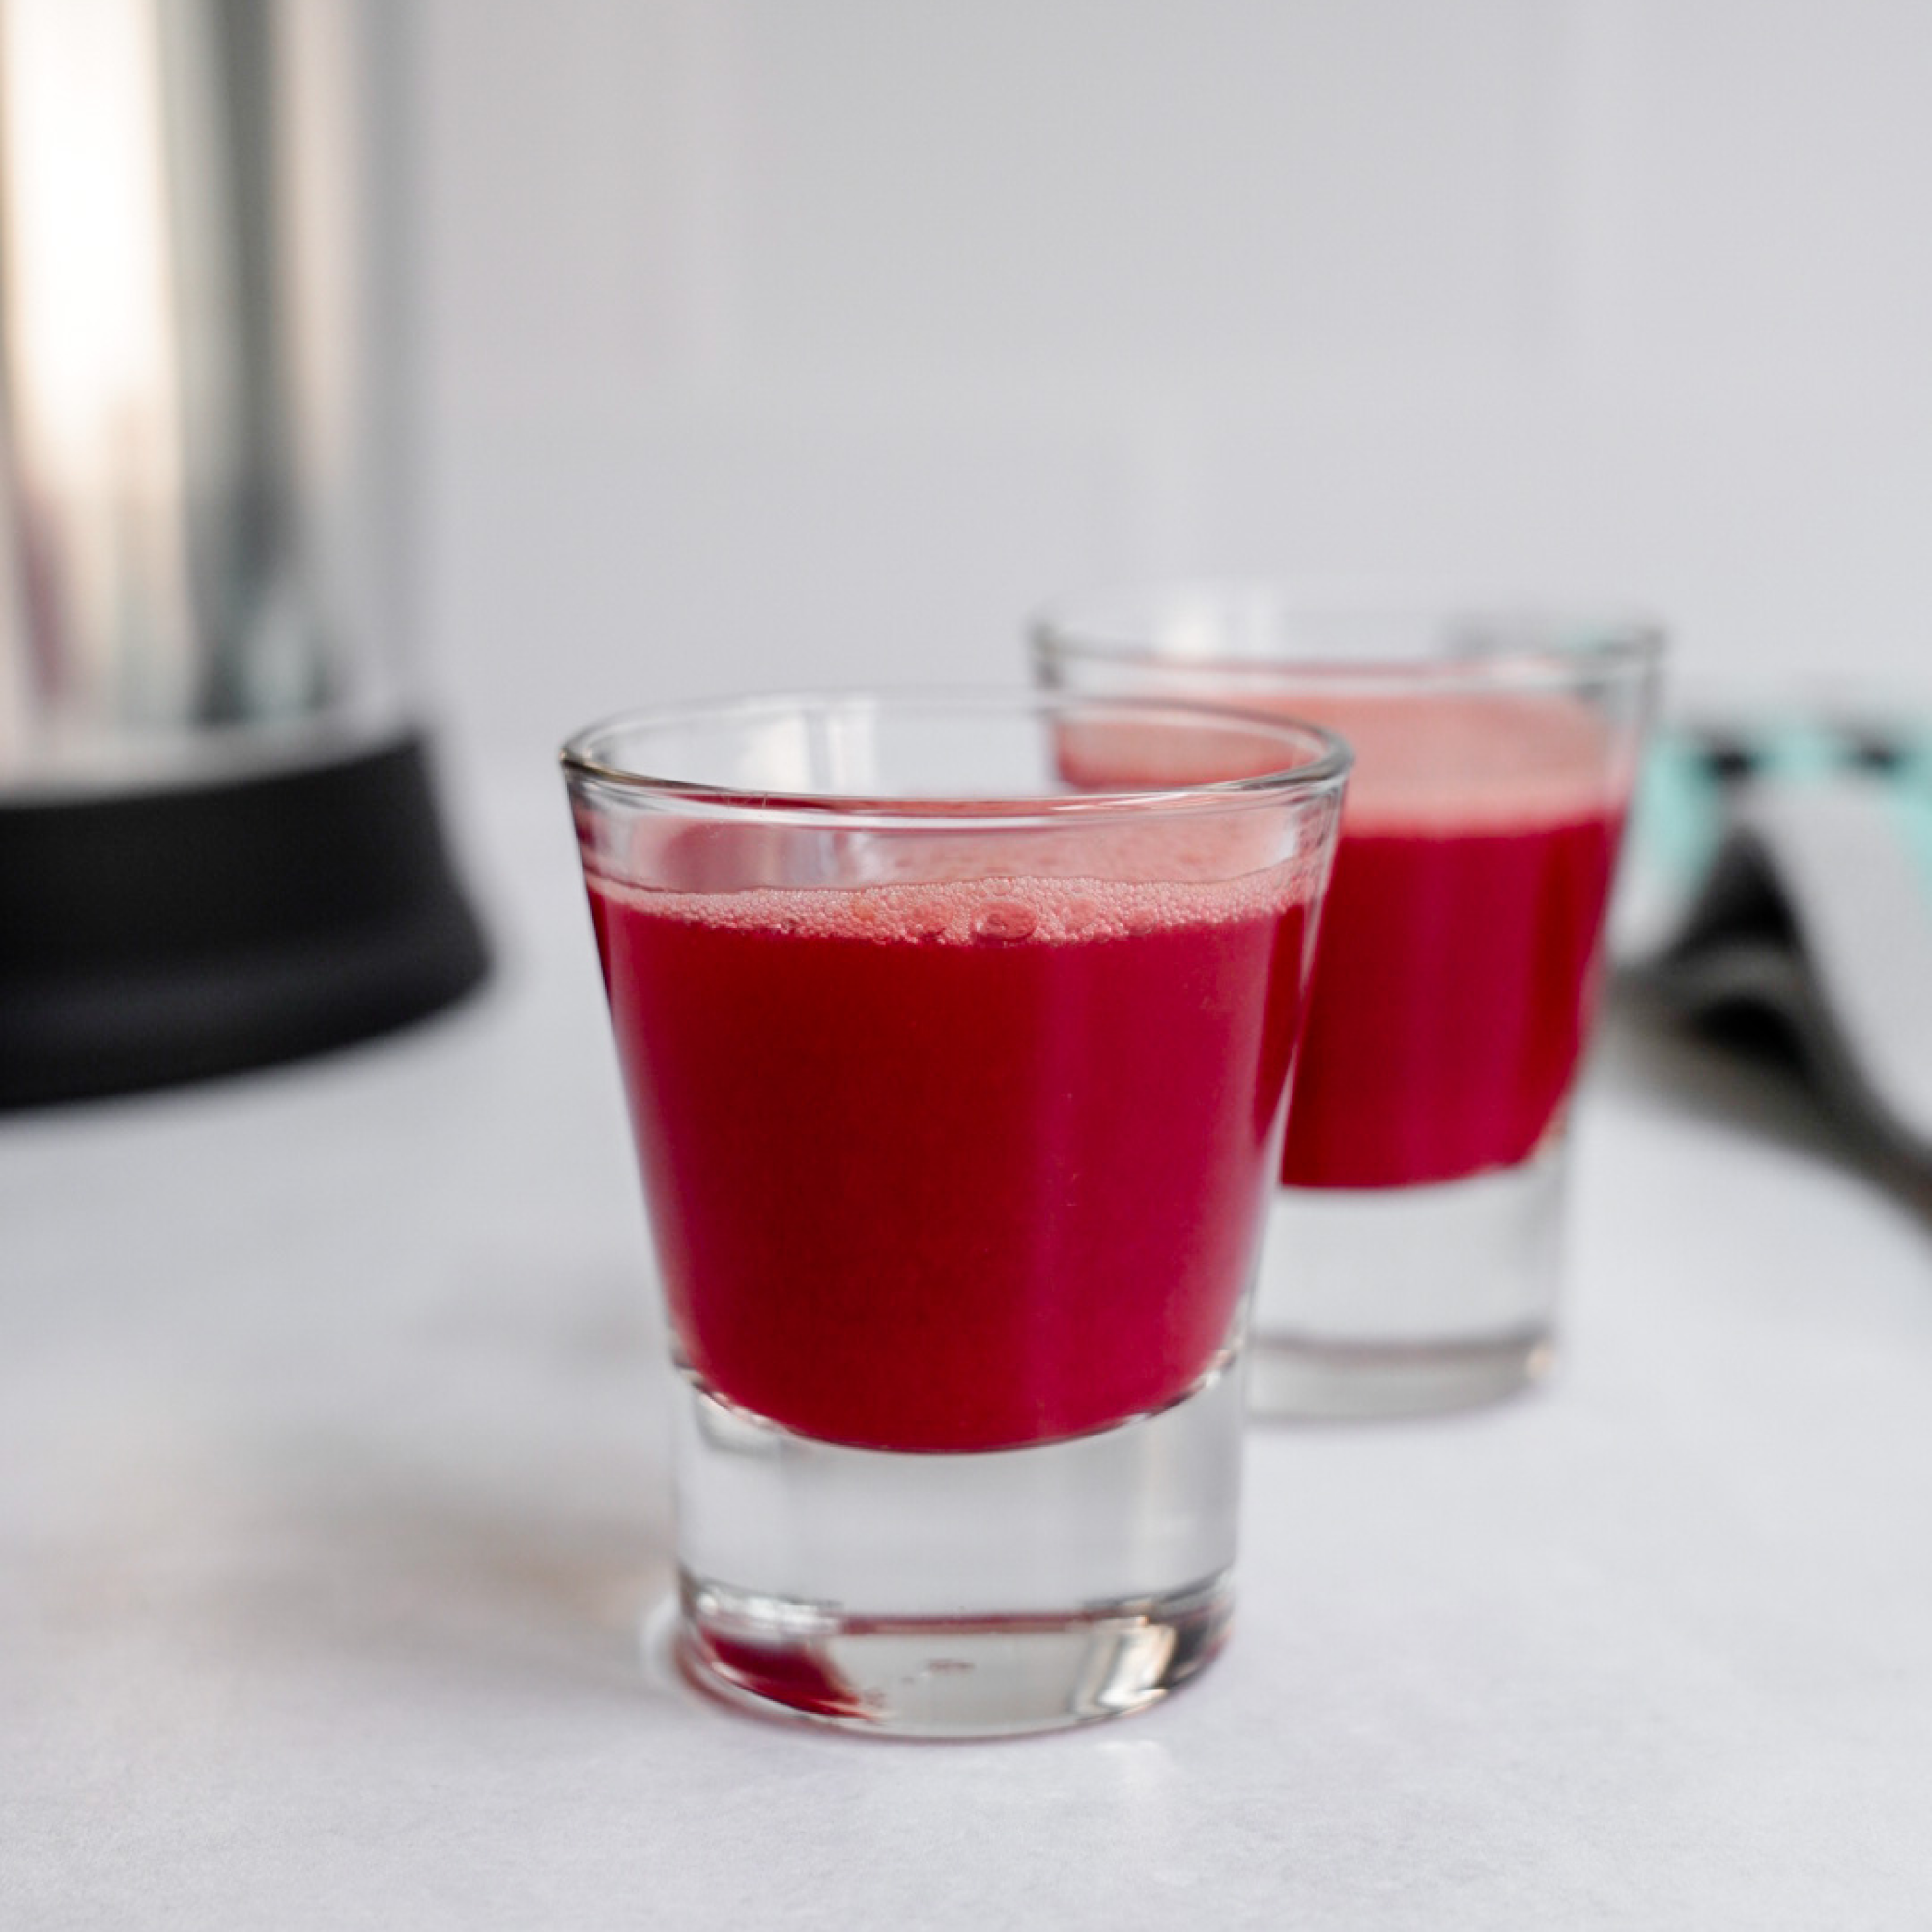 Healthy and fresh Power Wellness Shot made easily with Almond Cow machine (79 characters)